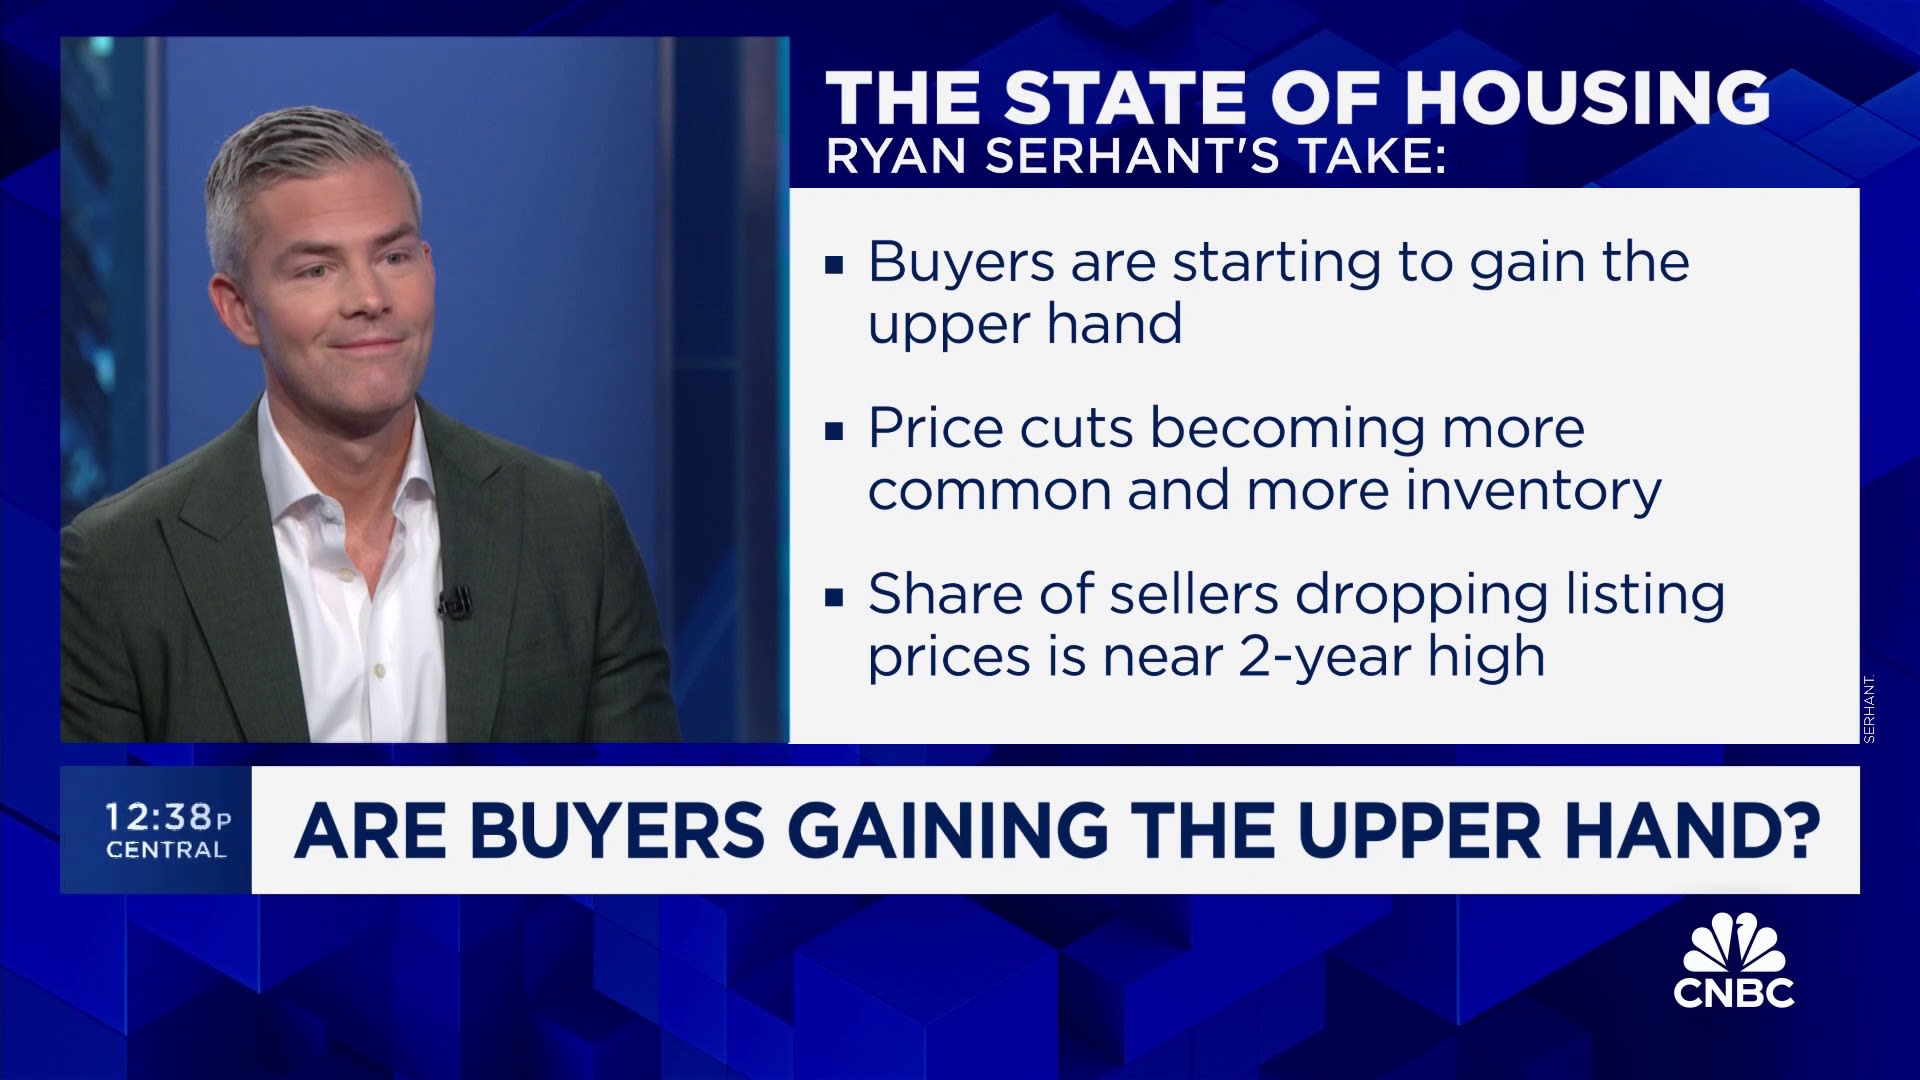 Ryan Serhant on housing market: Buyers are starting to gain the upper hand